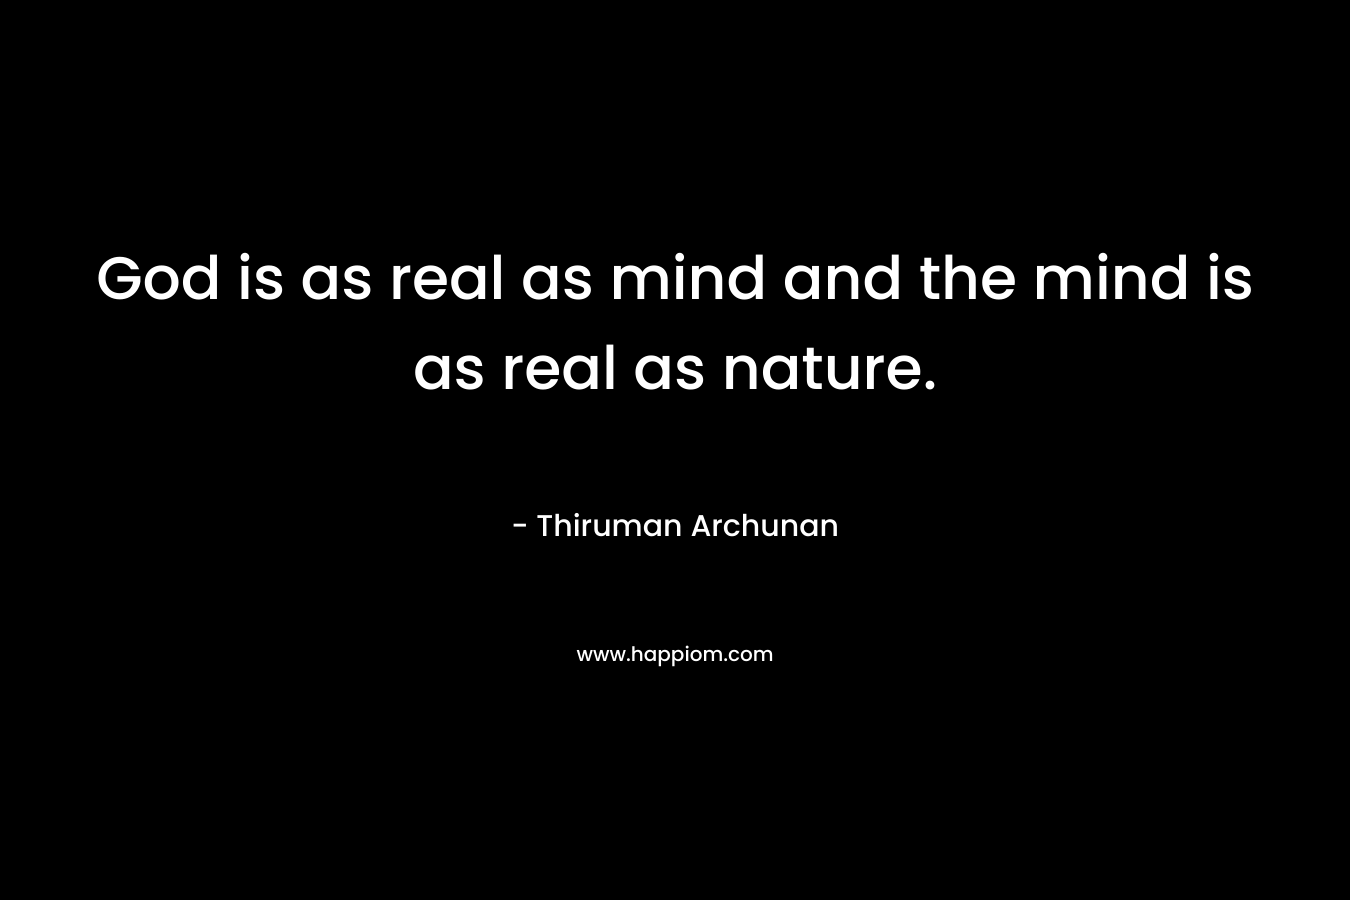 God is as real as mind and the mind is as real as nature.